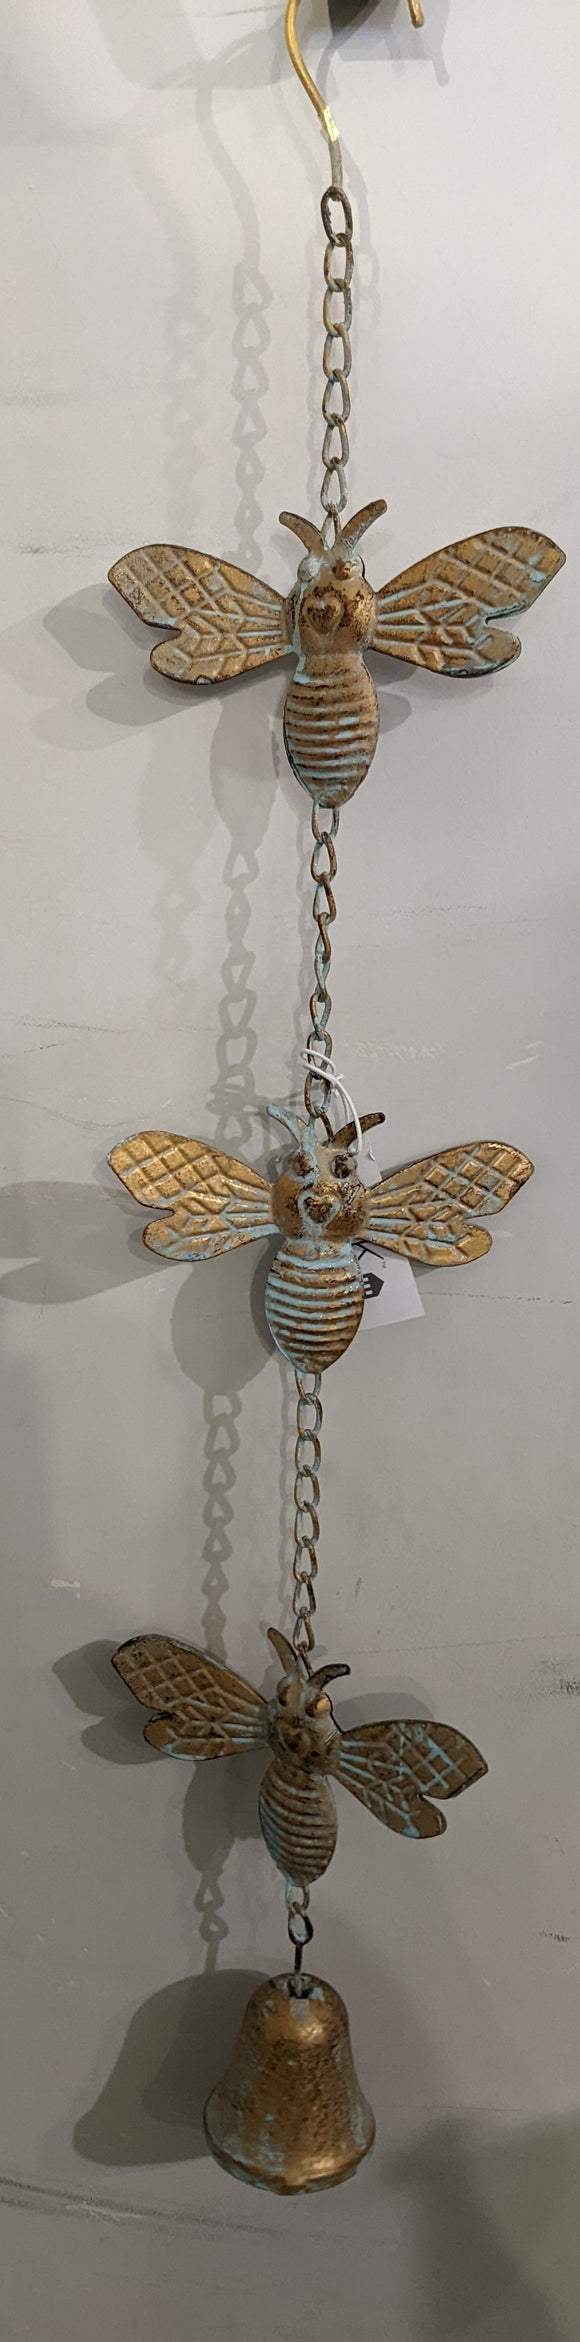 Windchime with Bee motif